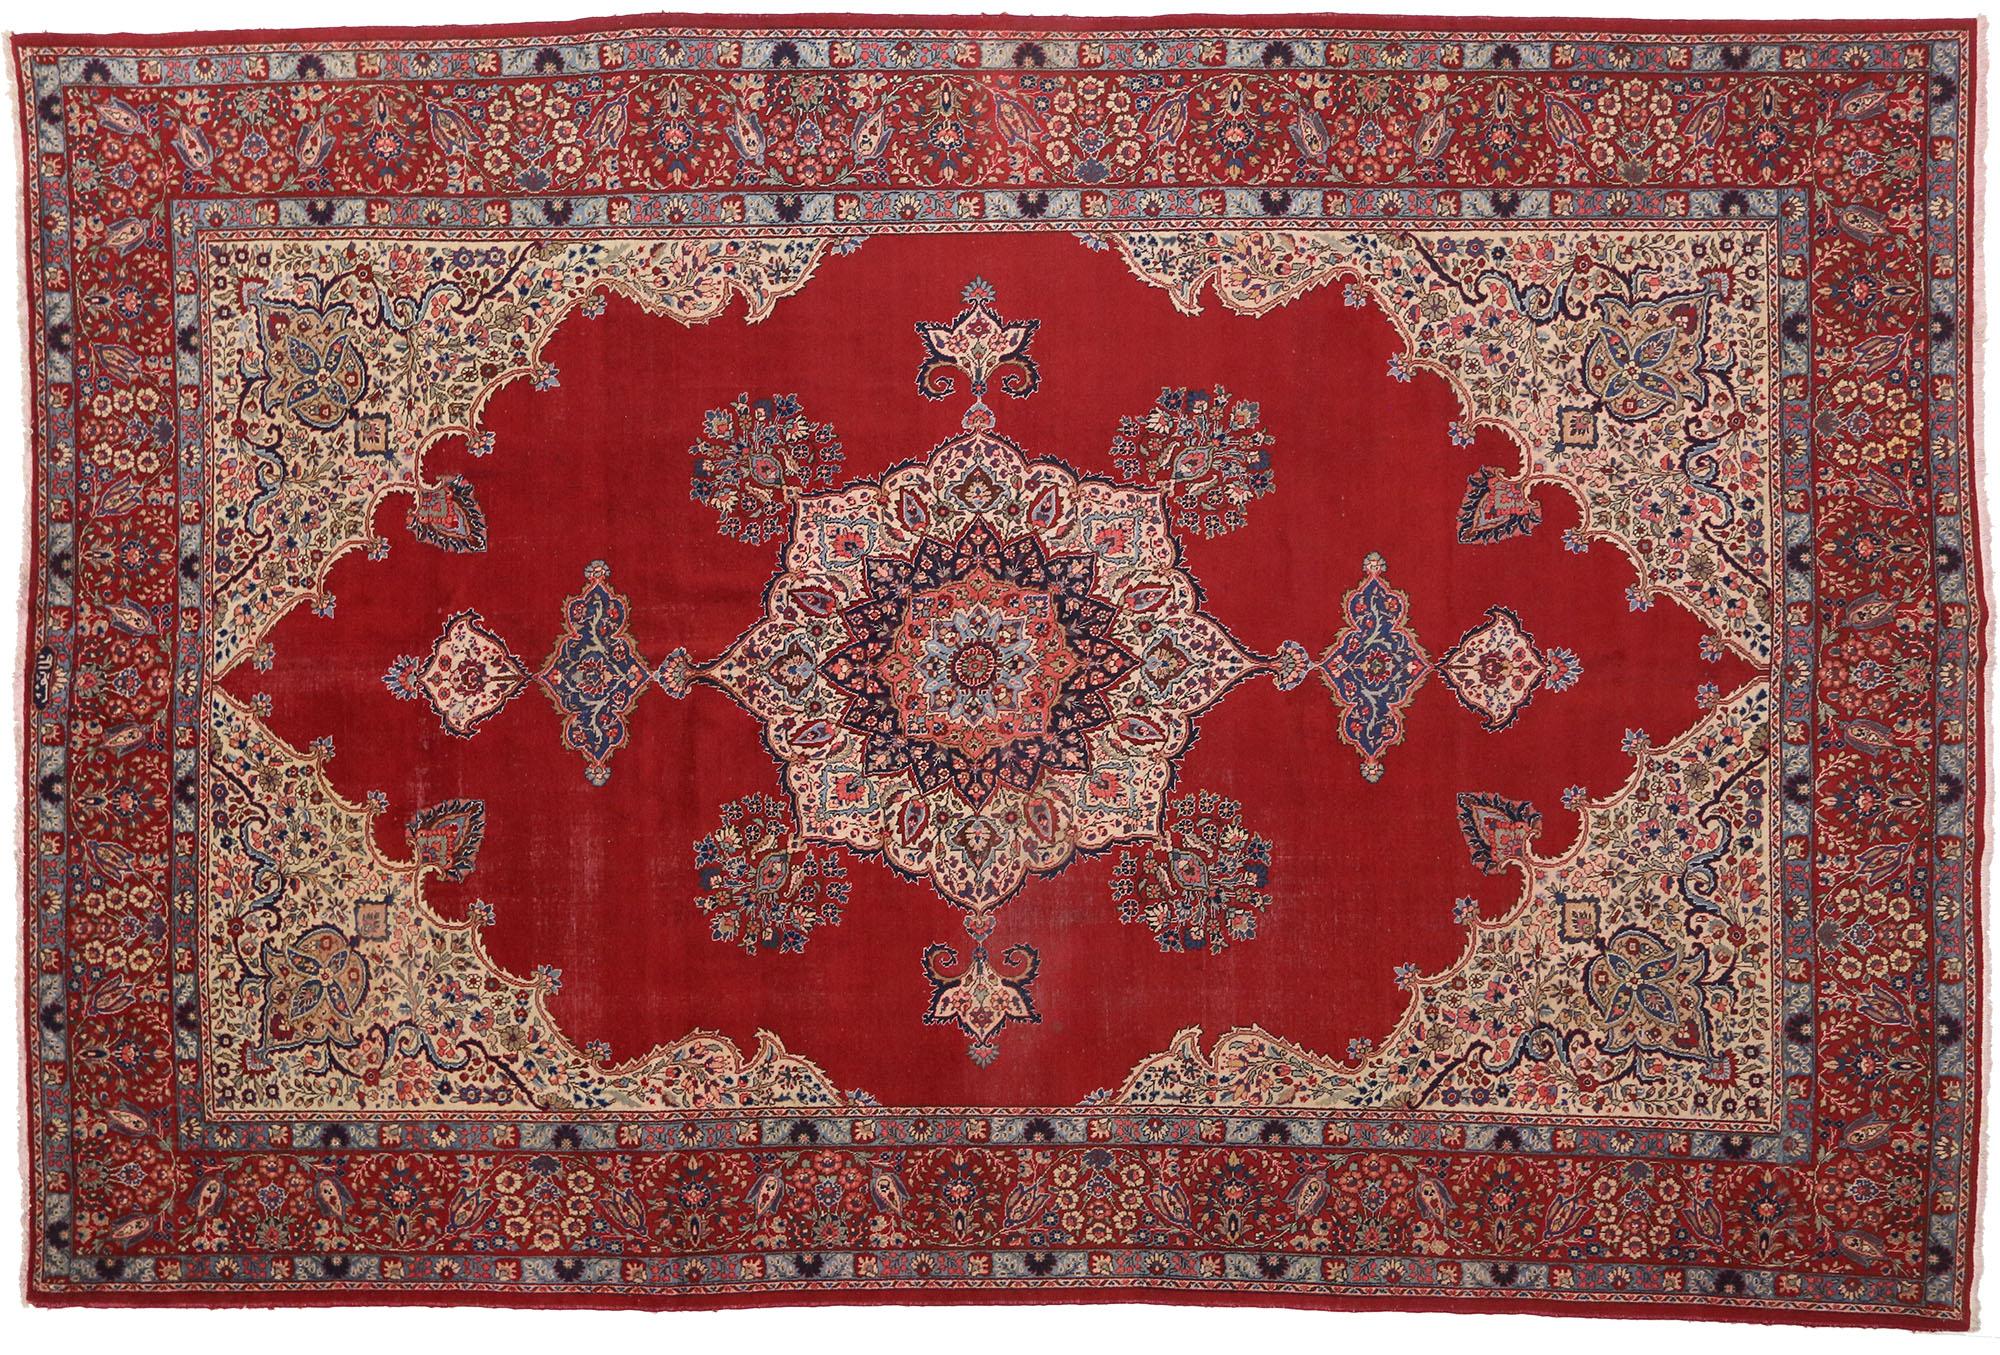 20th Century Antique Persian Tabriz Rug, 11'09 x 17'06  For Sale